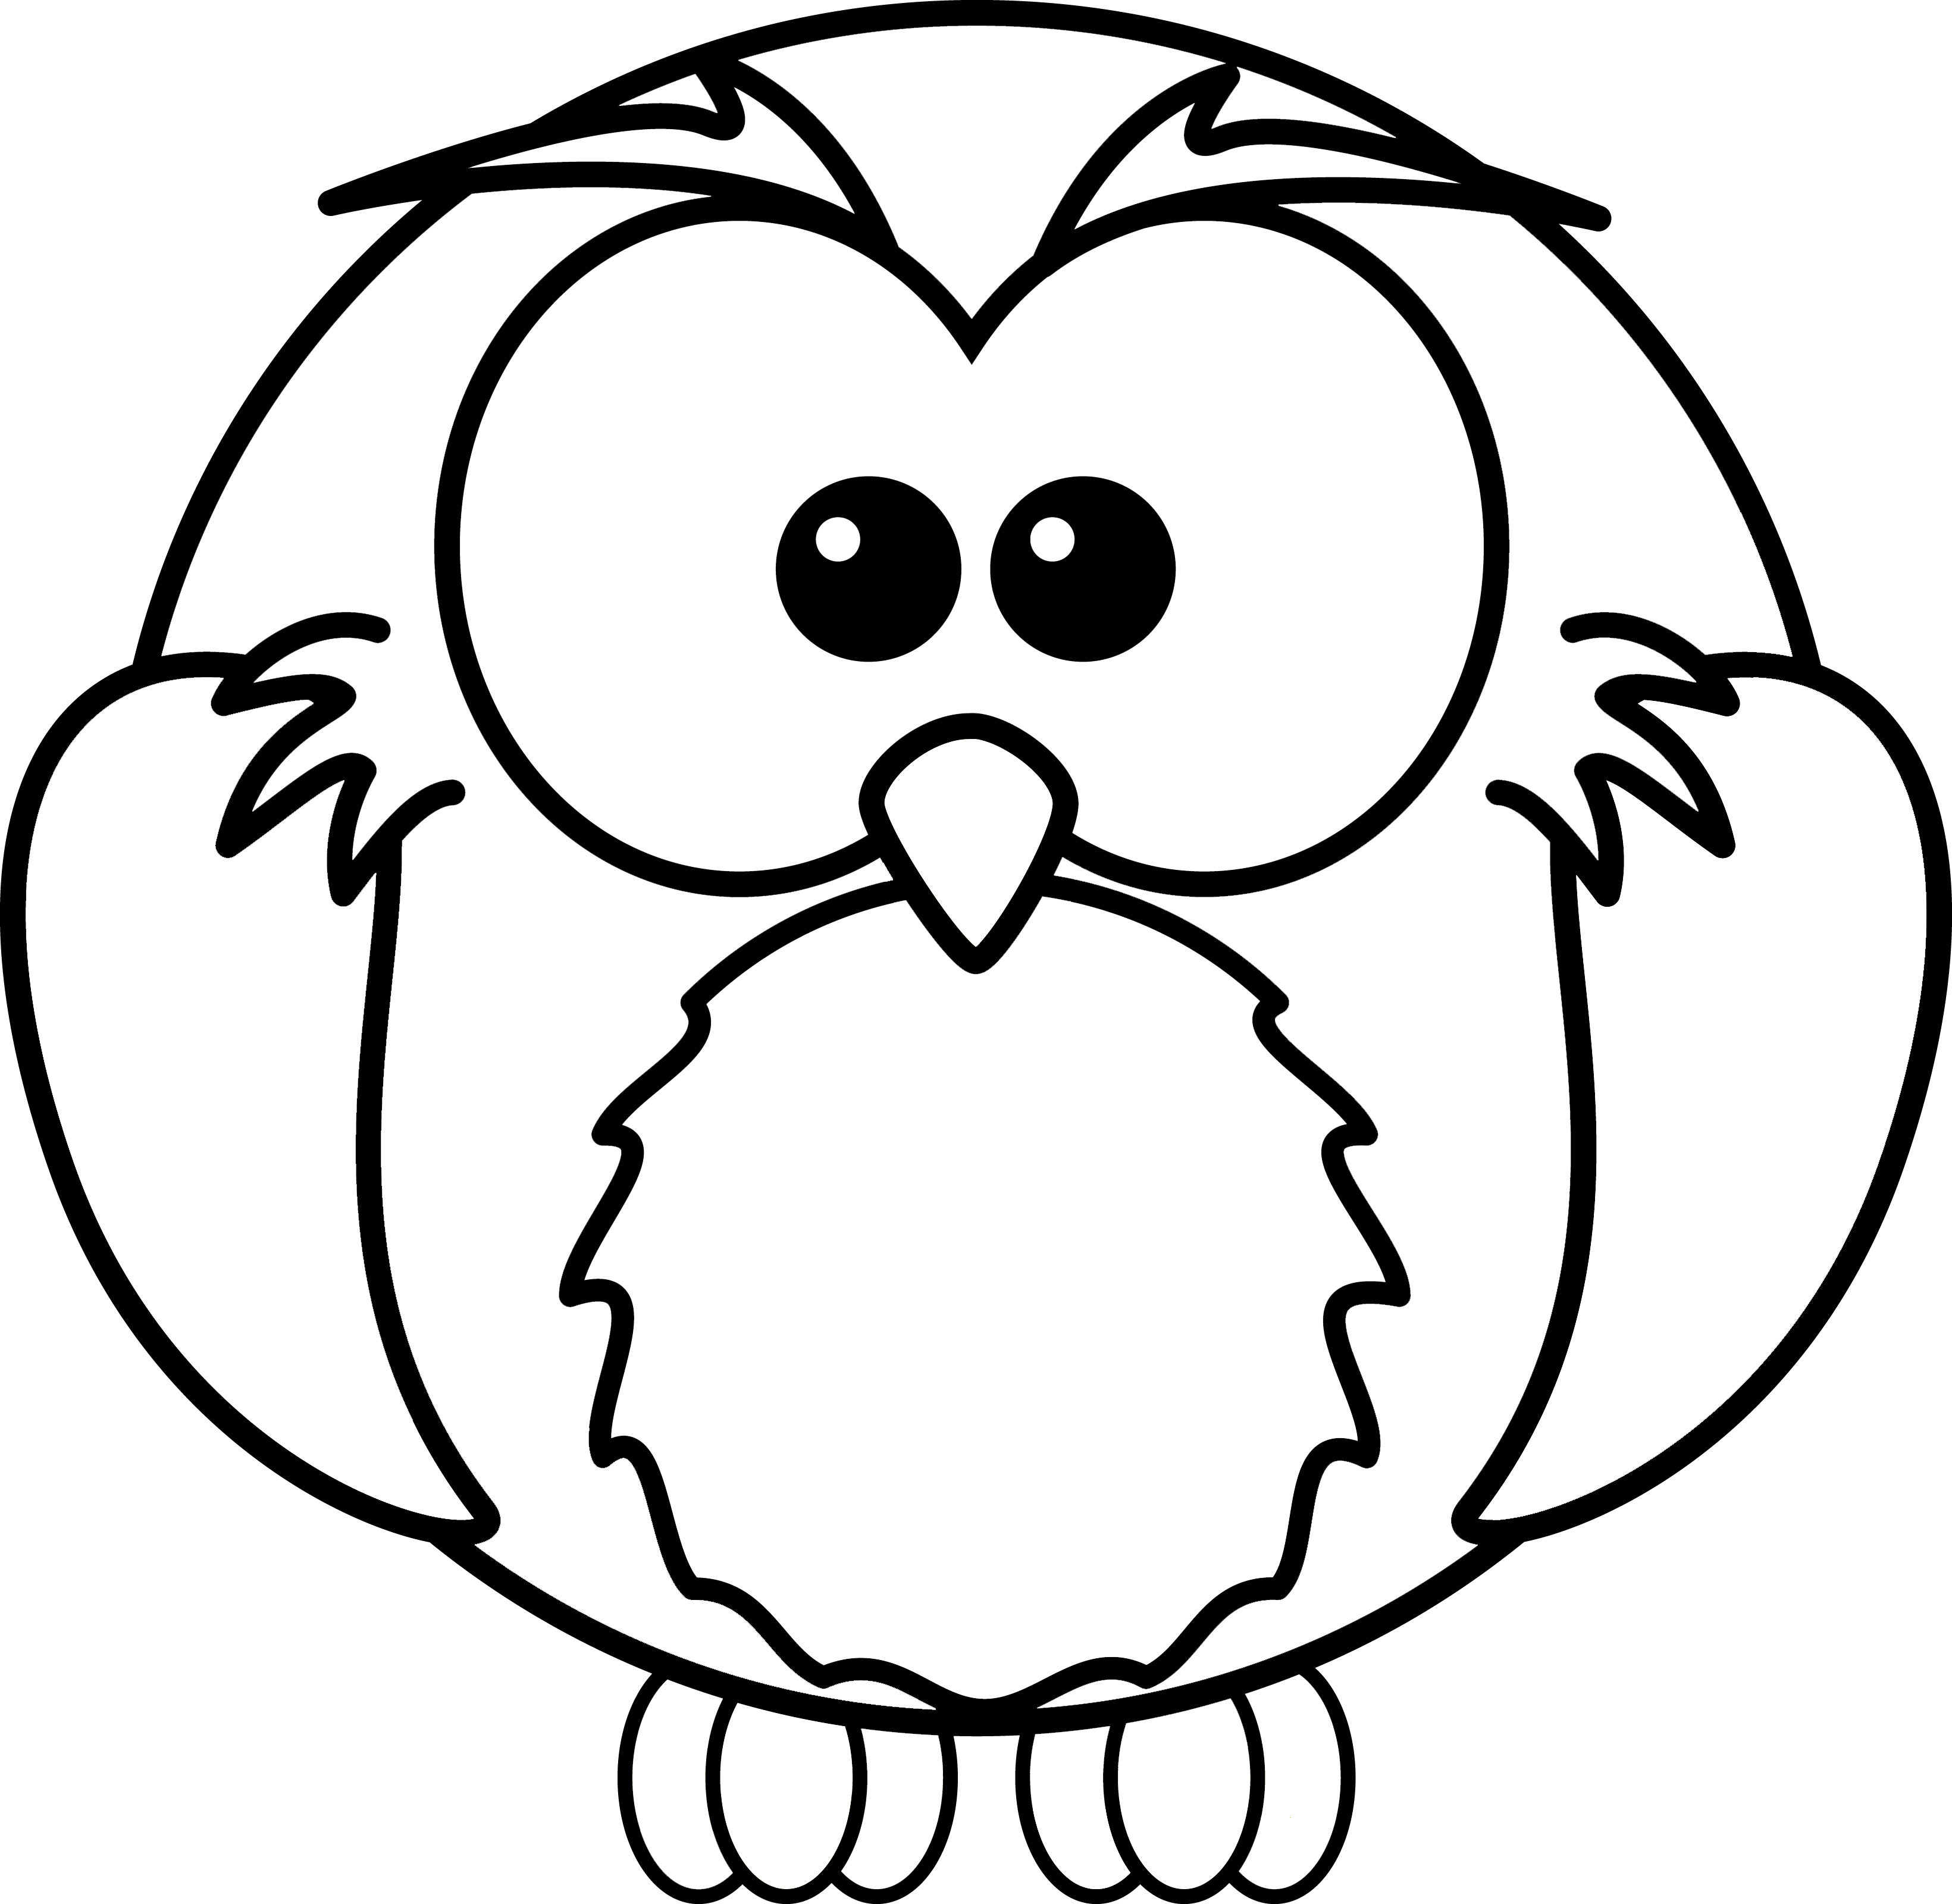 halloween pumpkin coloring pages funny easy